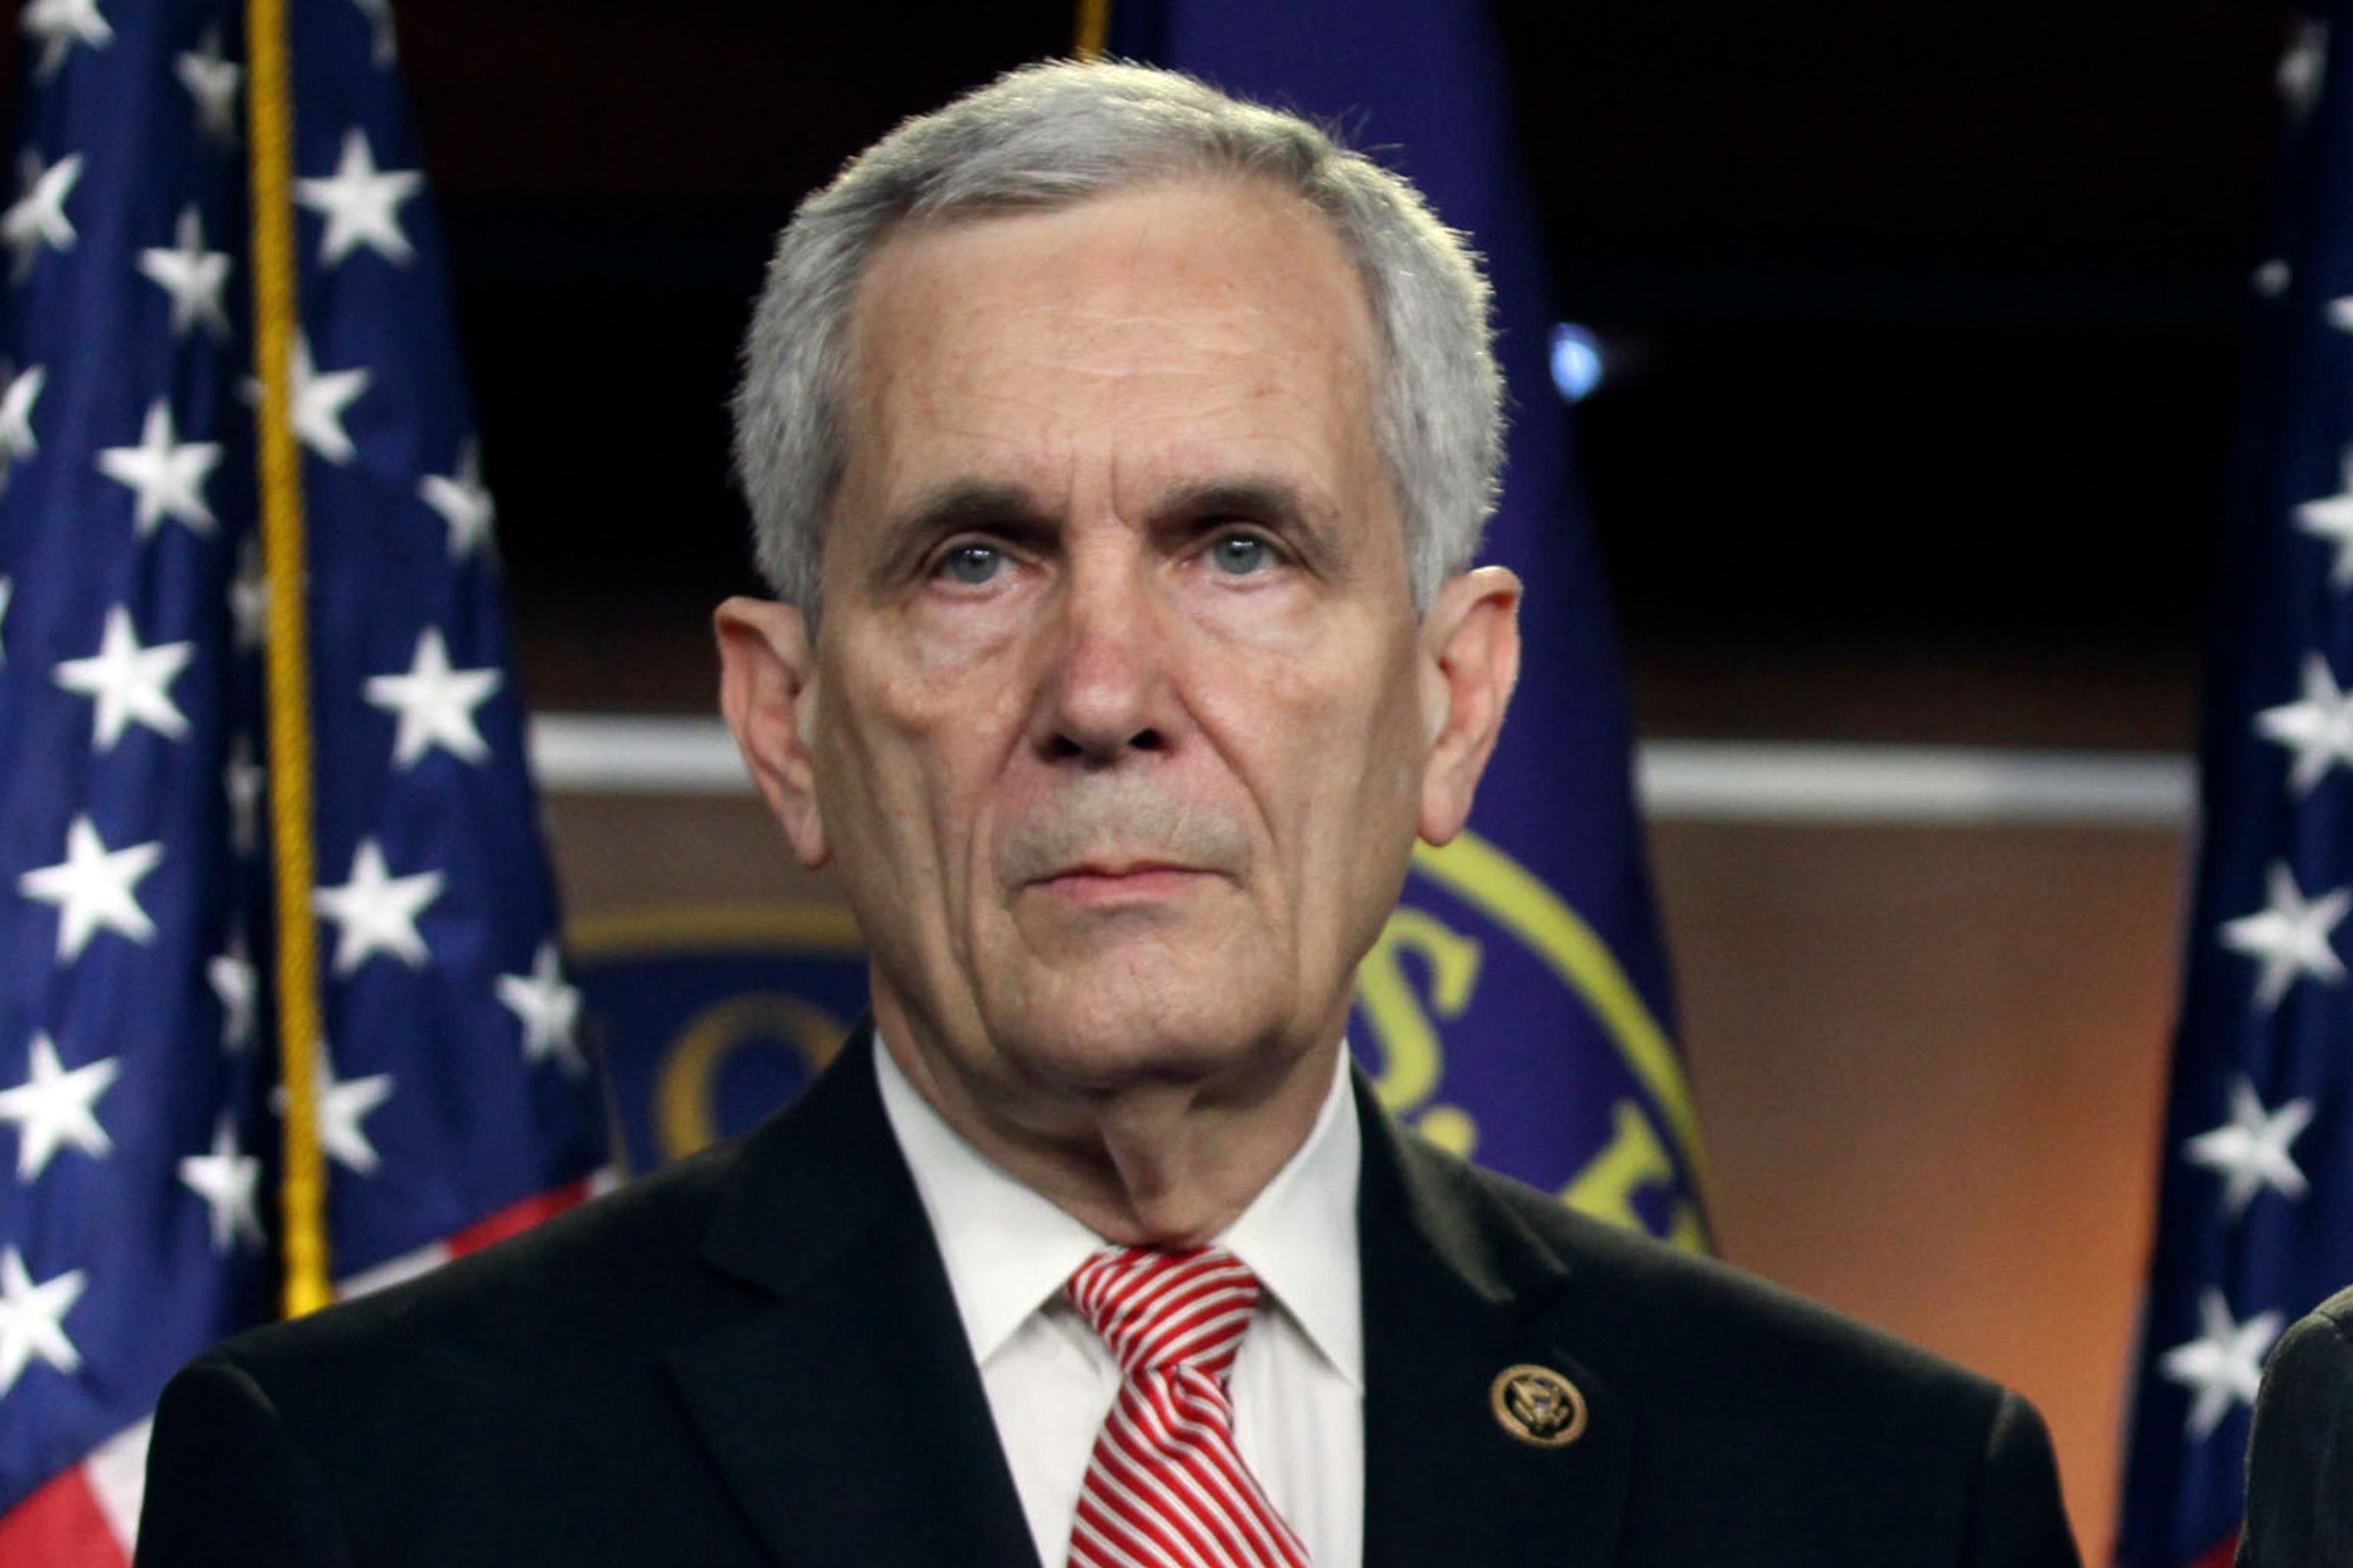 FI"LE - Rep. Lloyd Doggett, D-Texas, listens during a news conference on Capitol Hill in Washington, June 16, 2015. Doggett has become the first in the party to publicly call for President Joe Biden to step down as the Democratic nominee for president, citing Biden's debate performance failing to "effectively defend his many accomplishments." (AP Photo/Lauren Victoria Burke, File)